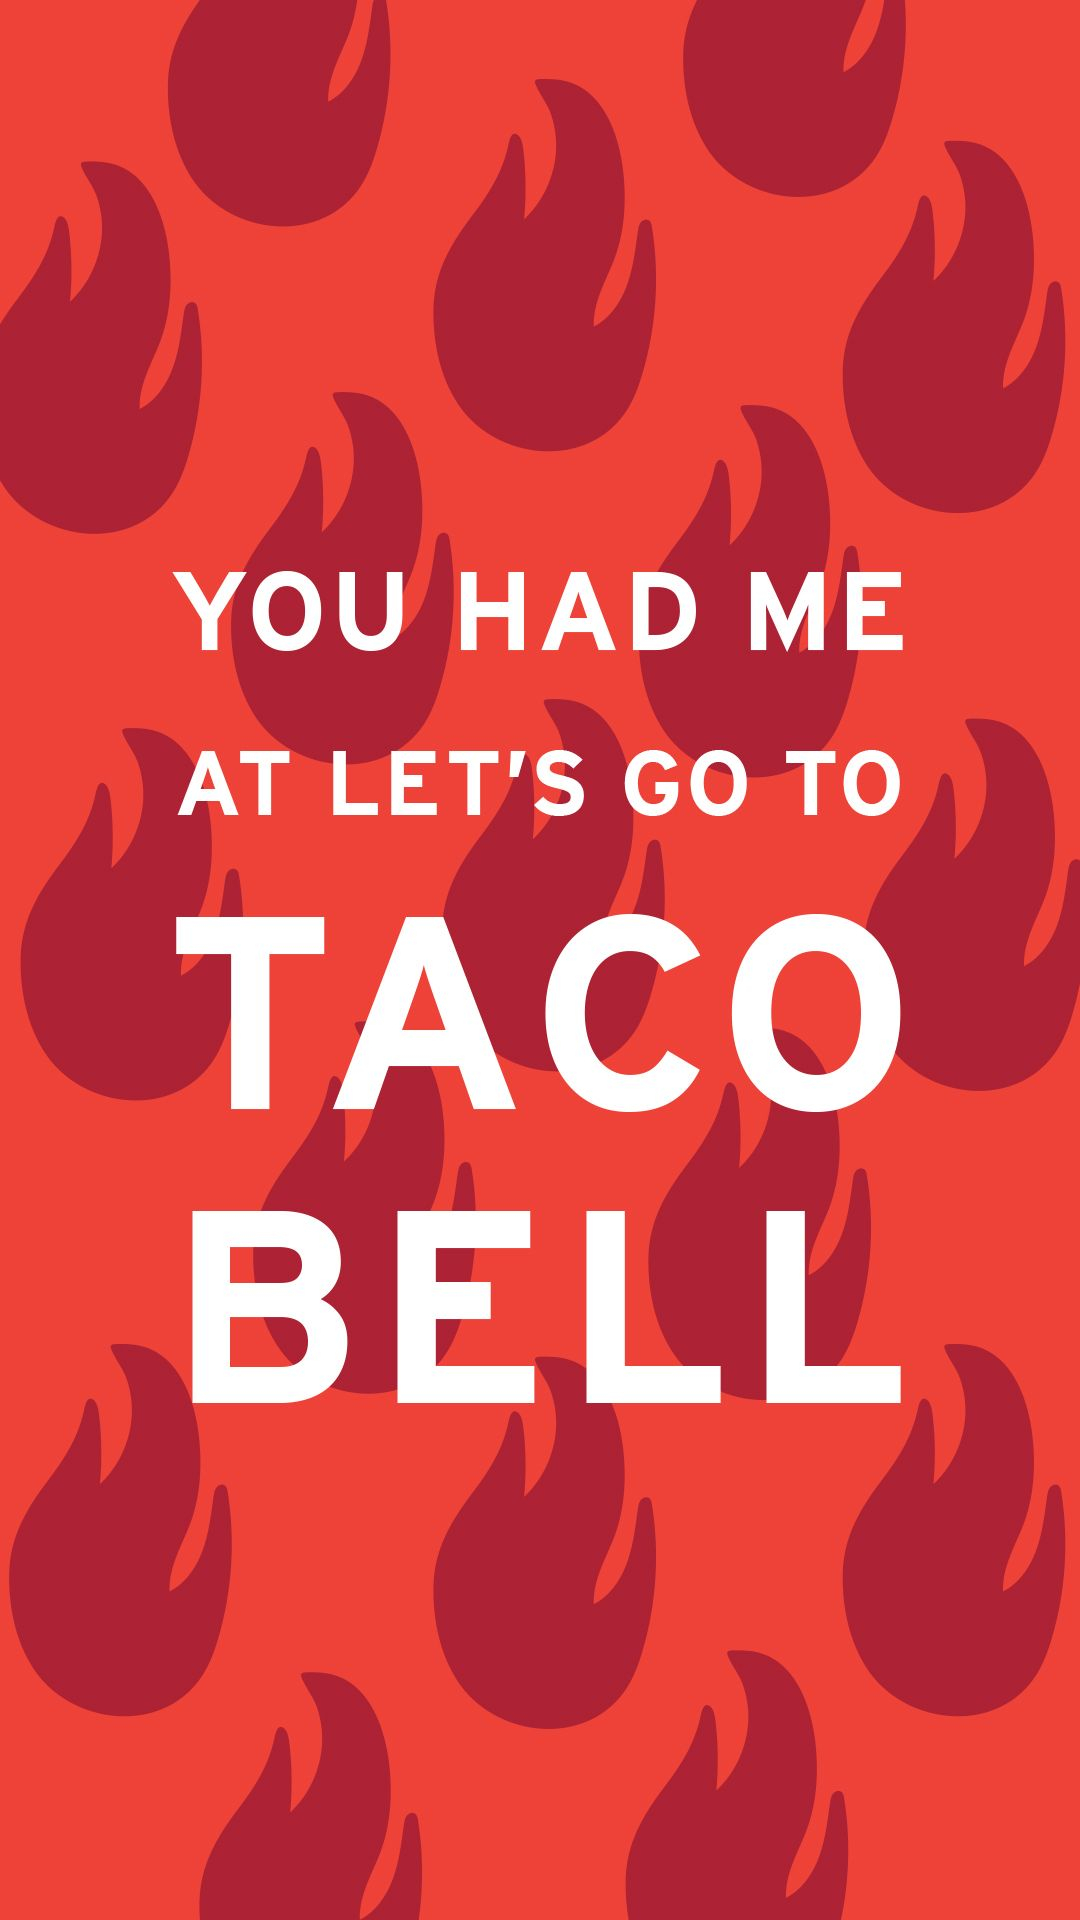 1080x1920 Taco Bell Phone Wallpaper | Funny phone wallpaper, Taco wallpaper, Taco bell